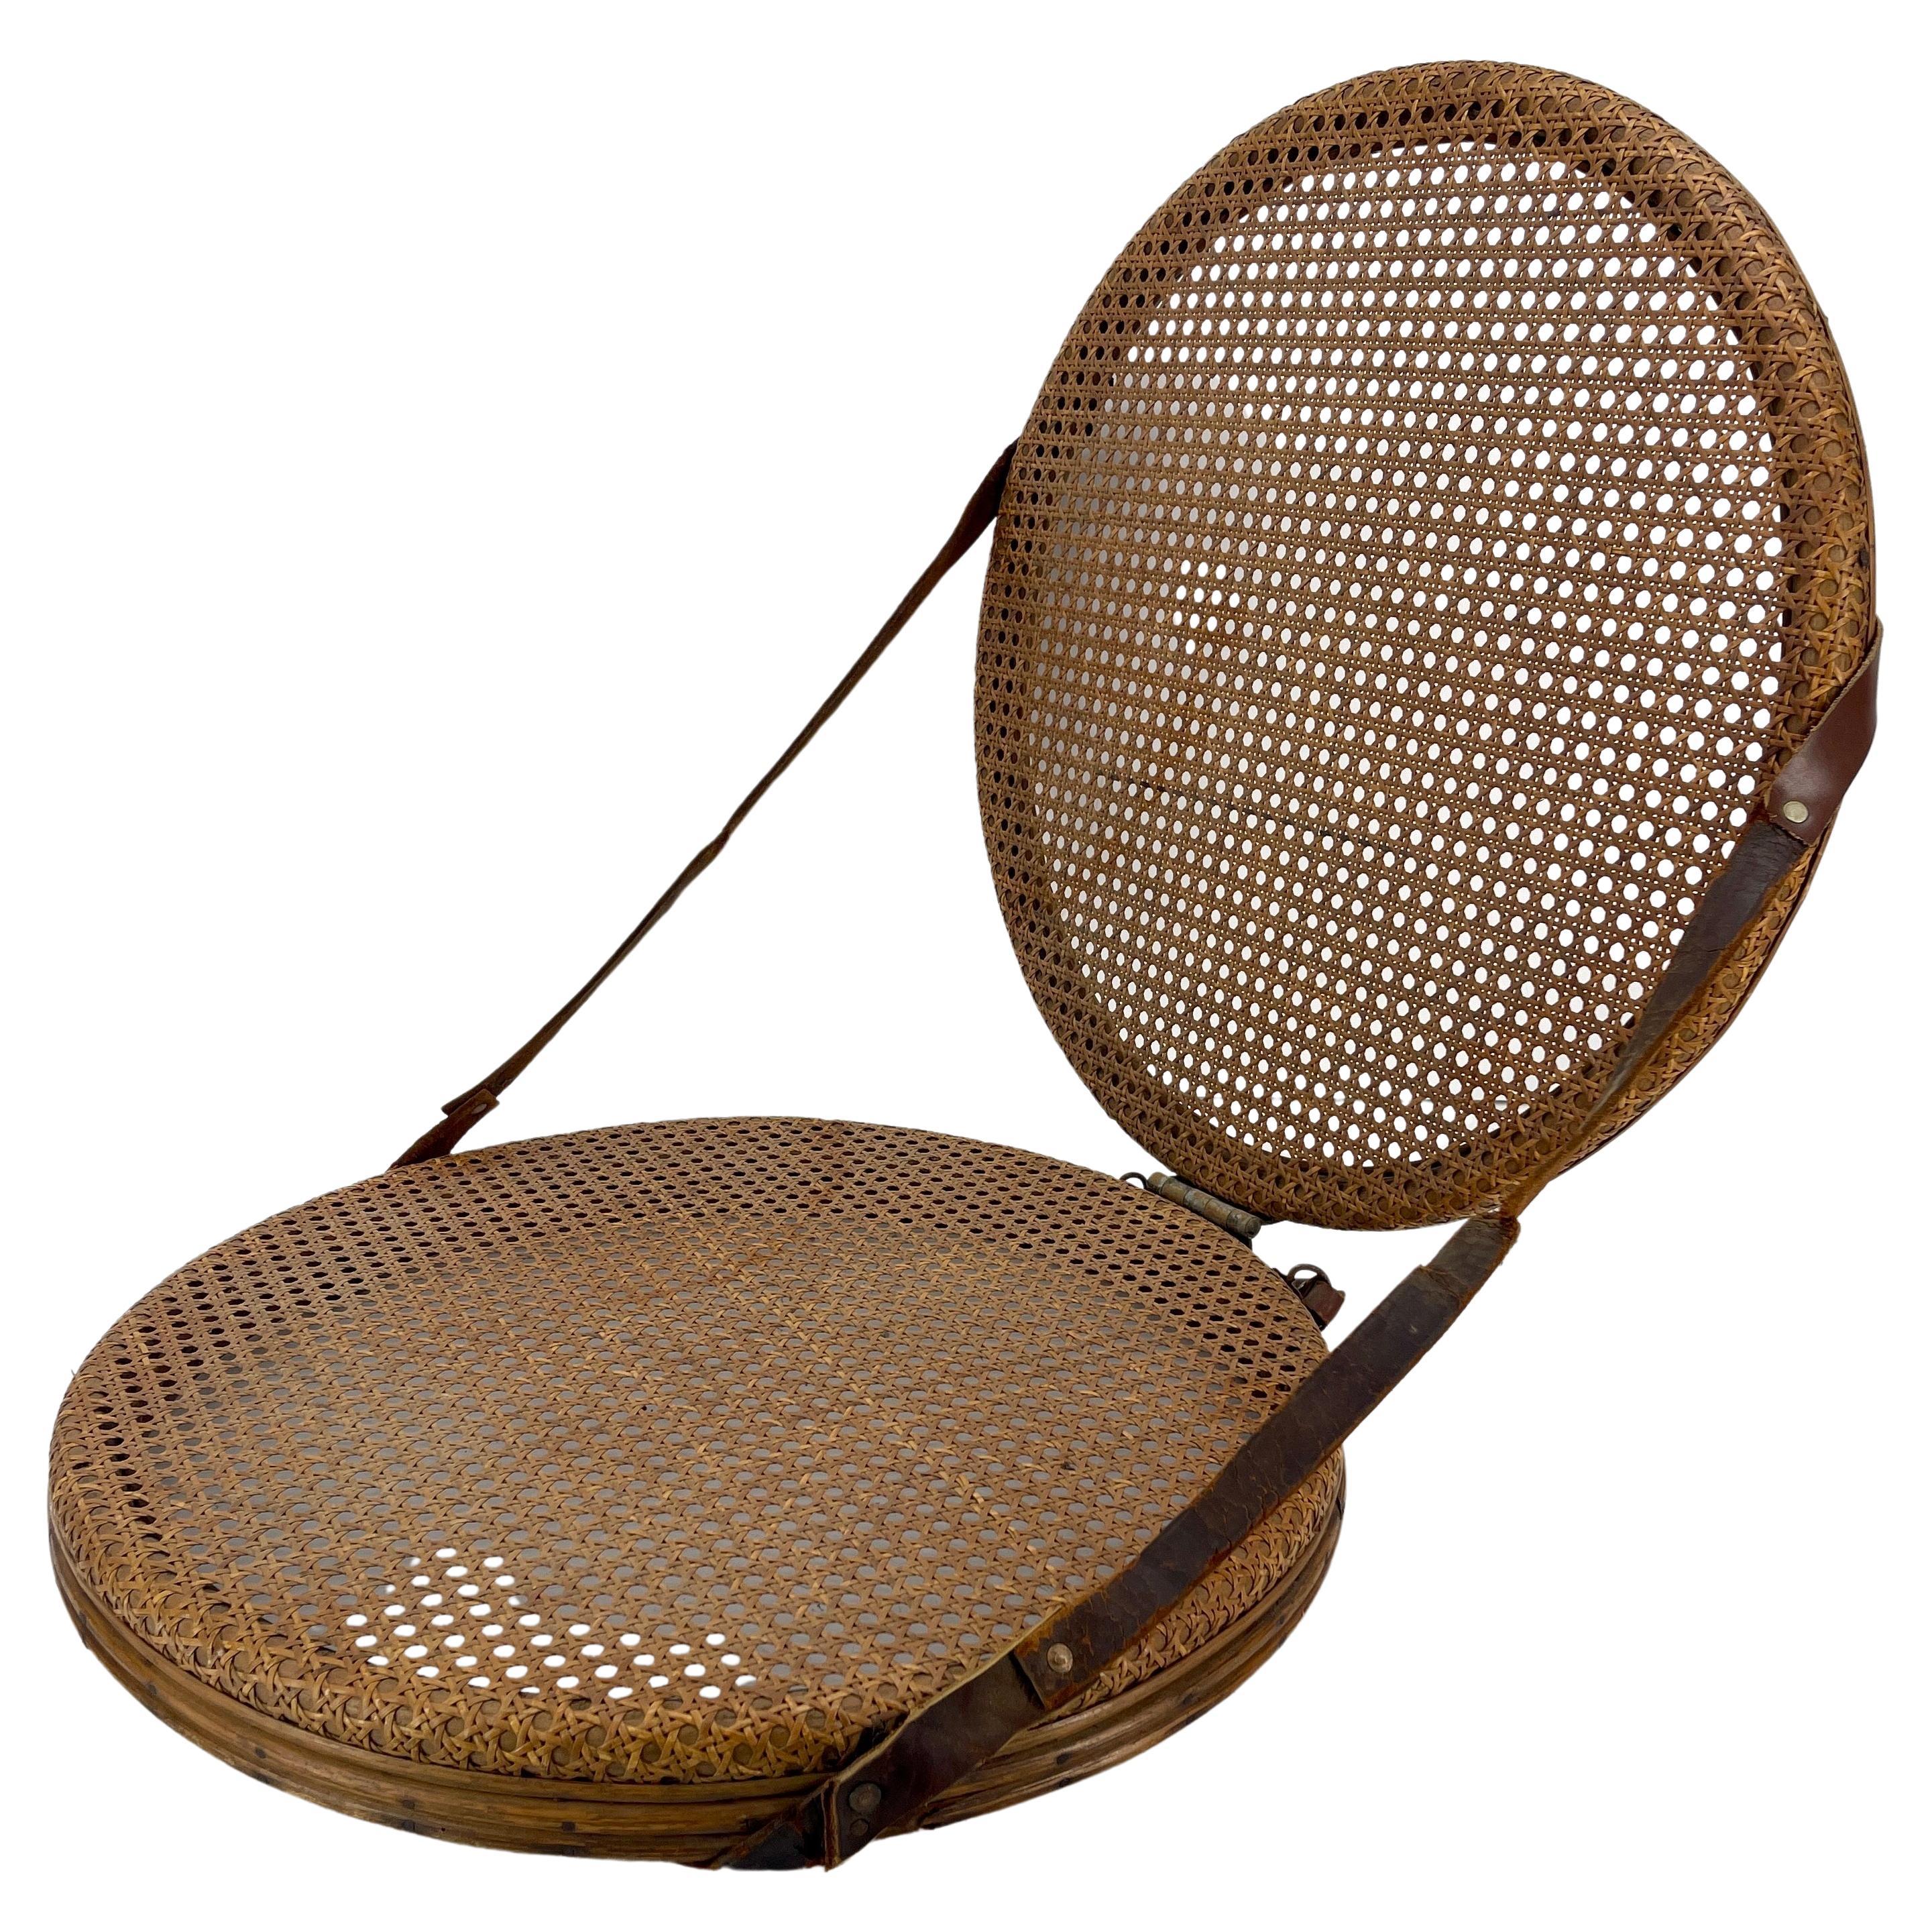 Classic American Portable Ruth Collins Round Beach Cane Backrest Seat, New York

Vintage folding picnic seat with original leather straps. The canning on this collasible piece is fully intact. Charming conversation piece. Marked with metal tag